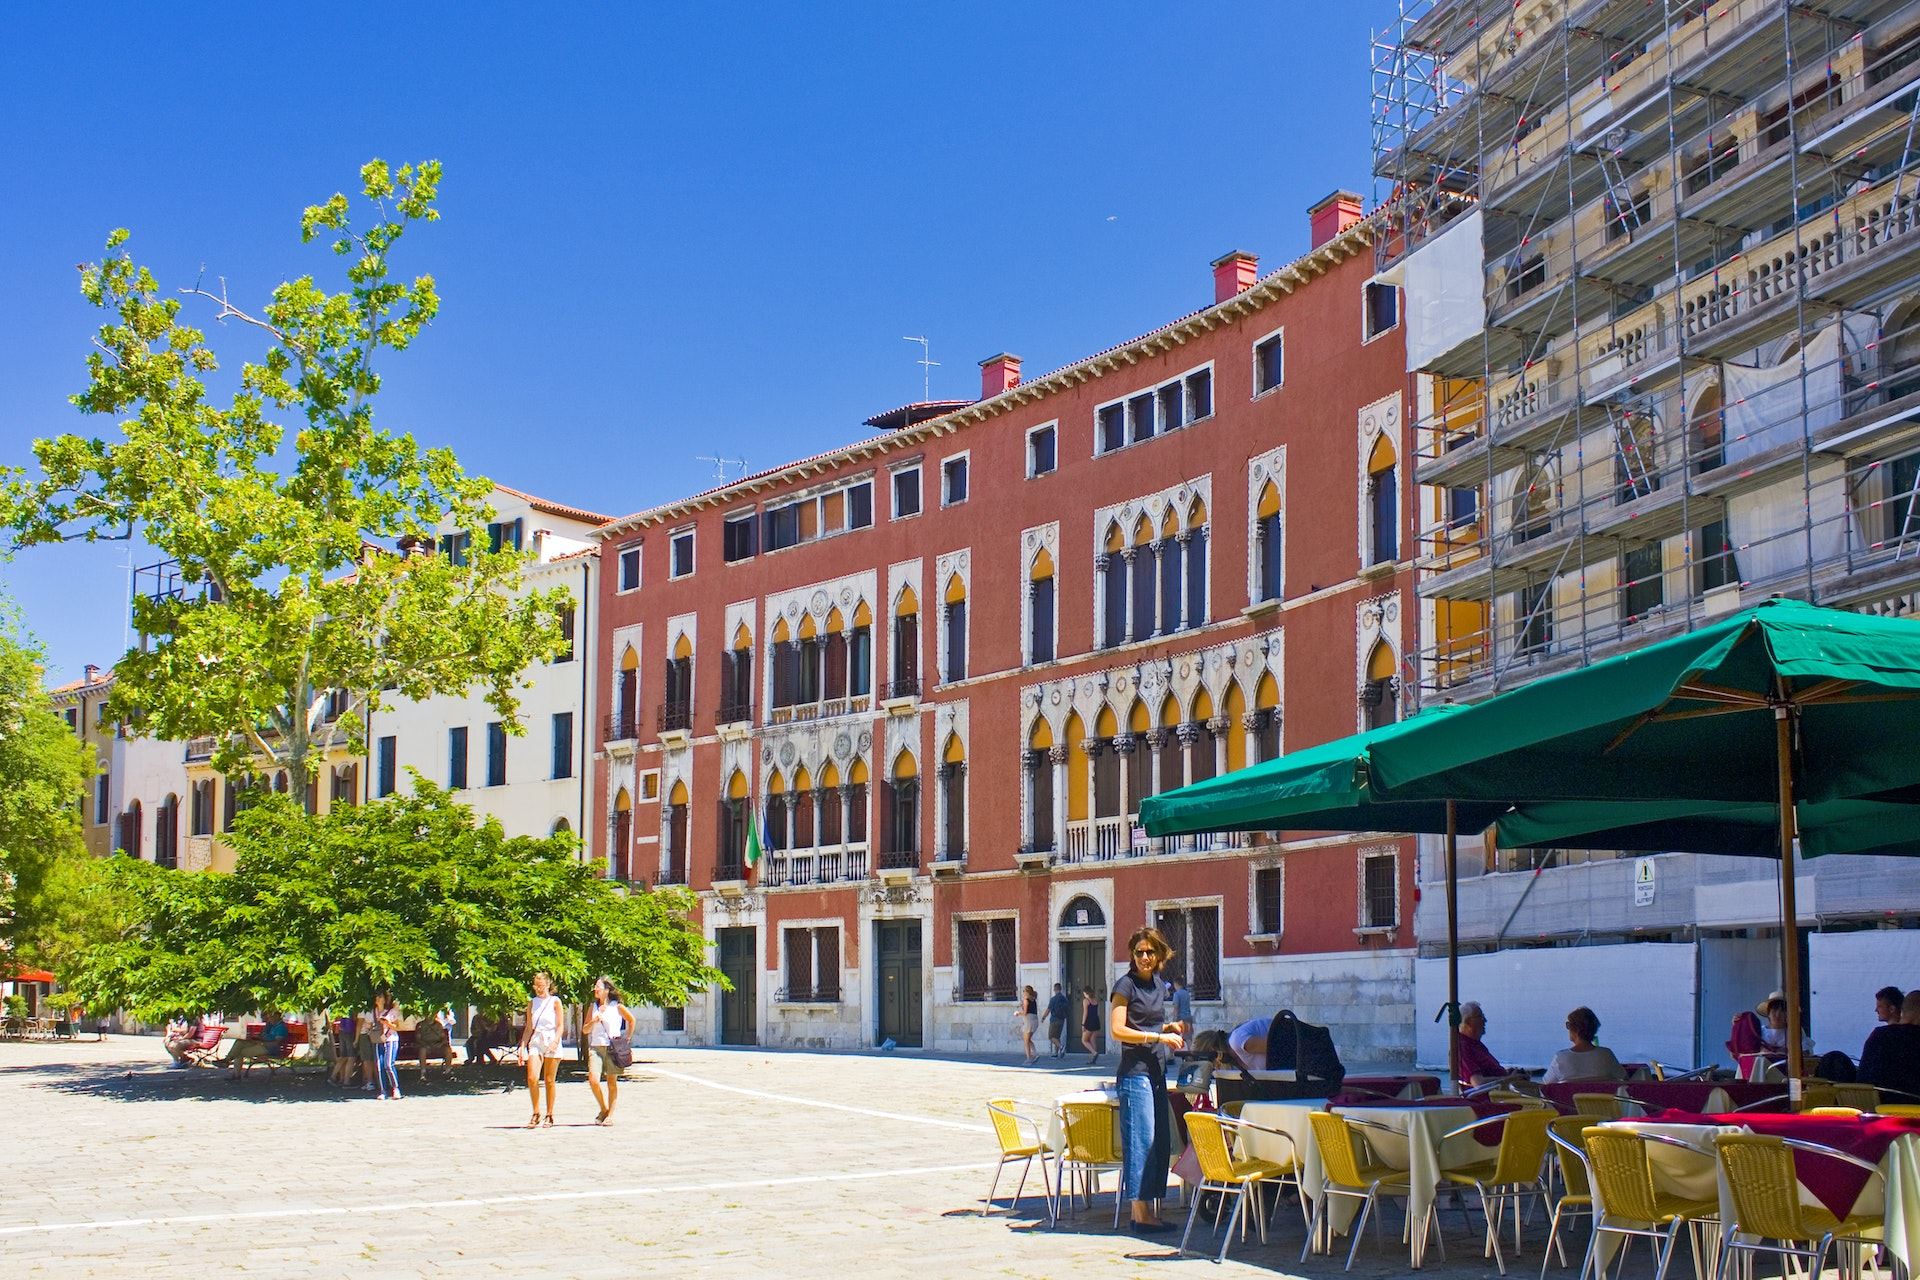 Sunshine and outdoor tables in Square Campo San Polo in Venice